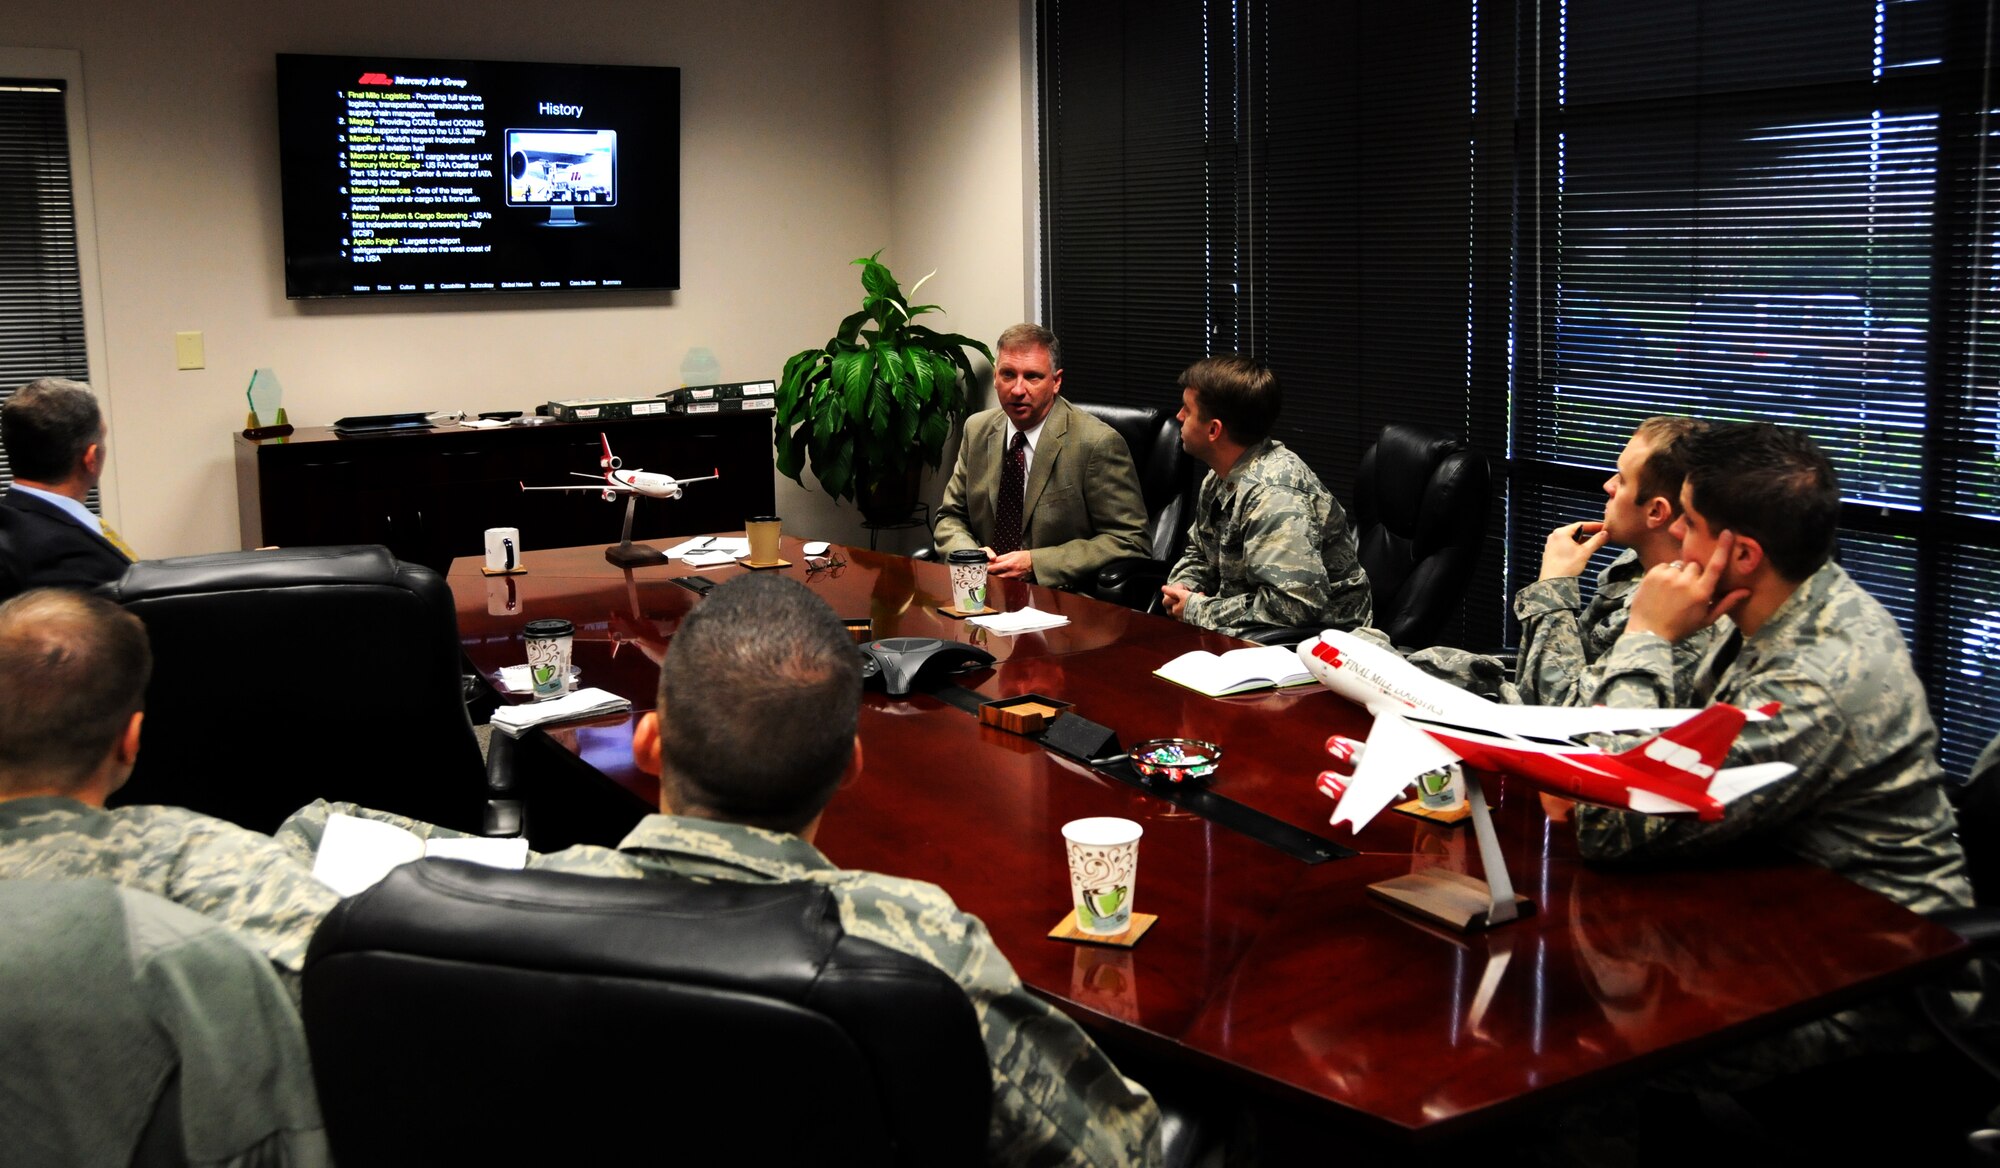 Mark Gordon, Contingency Operations director for Final Mile Logistics, speaks to Air Force Fellows at the FML facility in Atlanta, Ga., Dec. 8, 2014. Five majors from AMC came to the Atlanta area Dec. 8 through 10 to speak to civilian business leaders as part of the Joint Mobility Fellowship Program. (U.S. Air Force photo by Senior Airman Daniel Phelps)